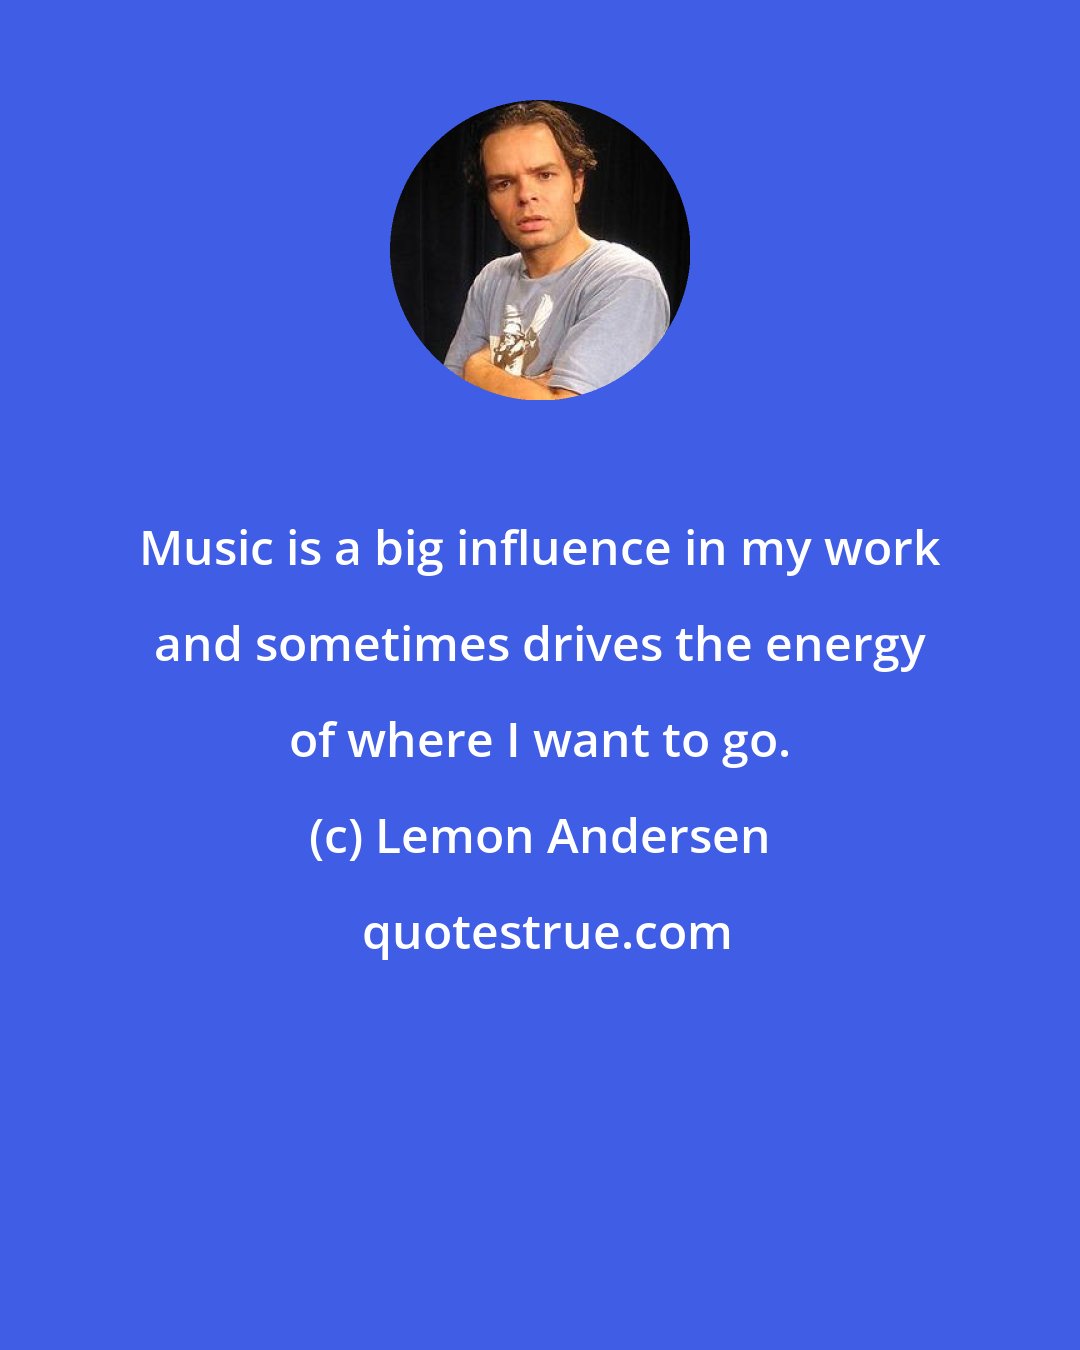 Lemon Andersen: Music is a big influence in my work and sometimes drives the energy of where I want to go.